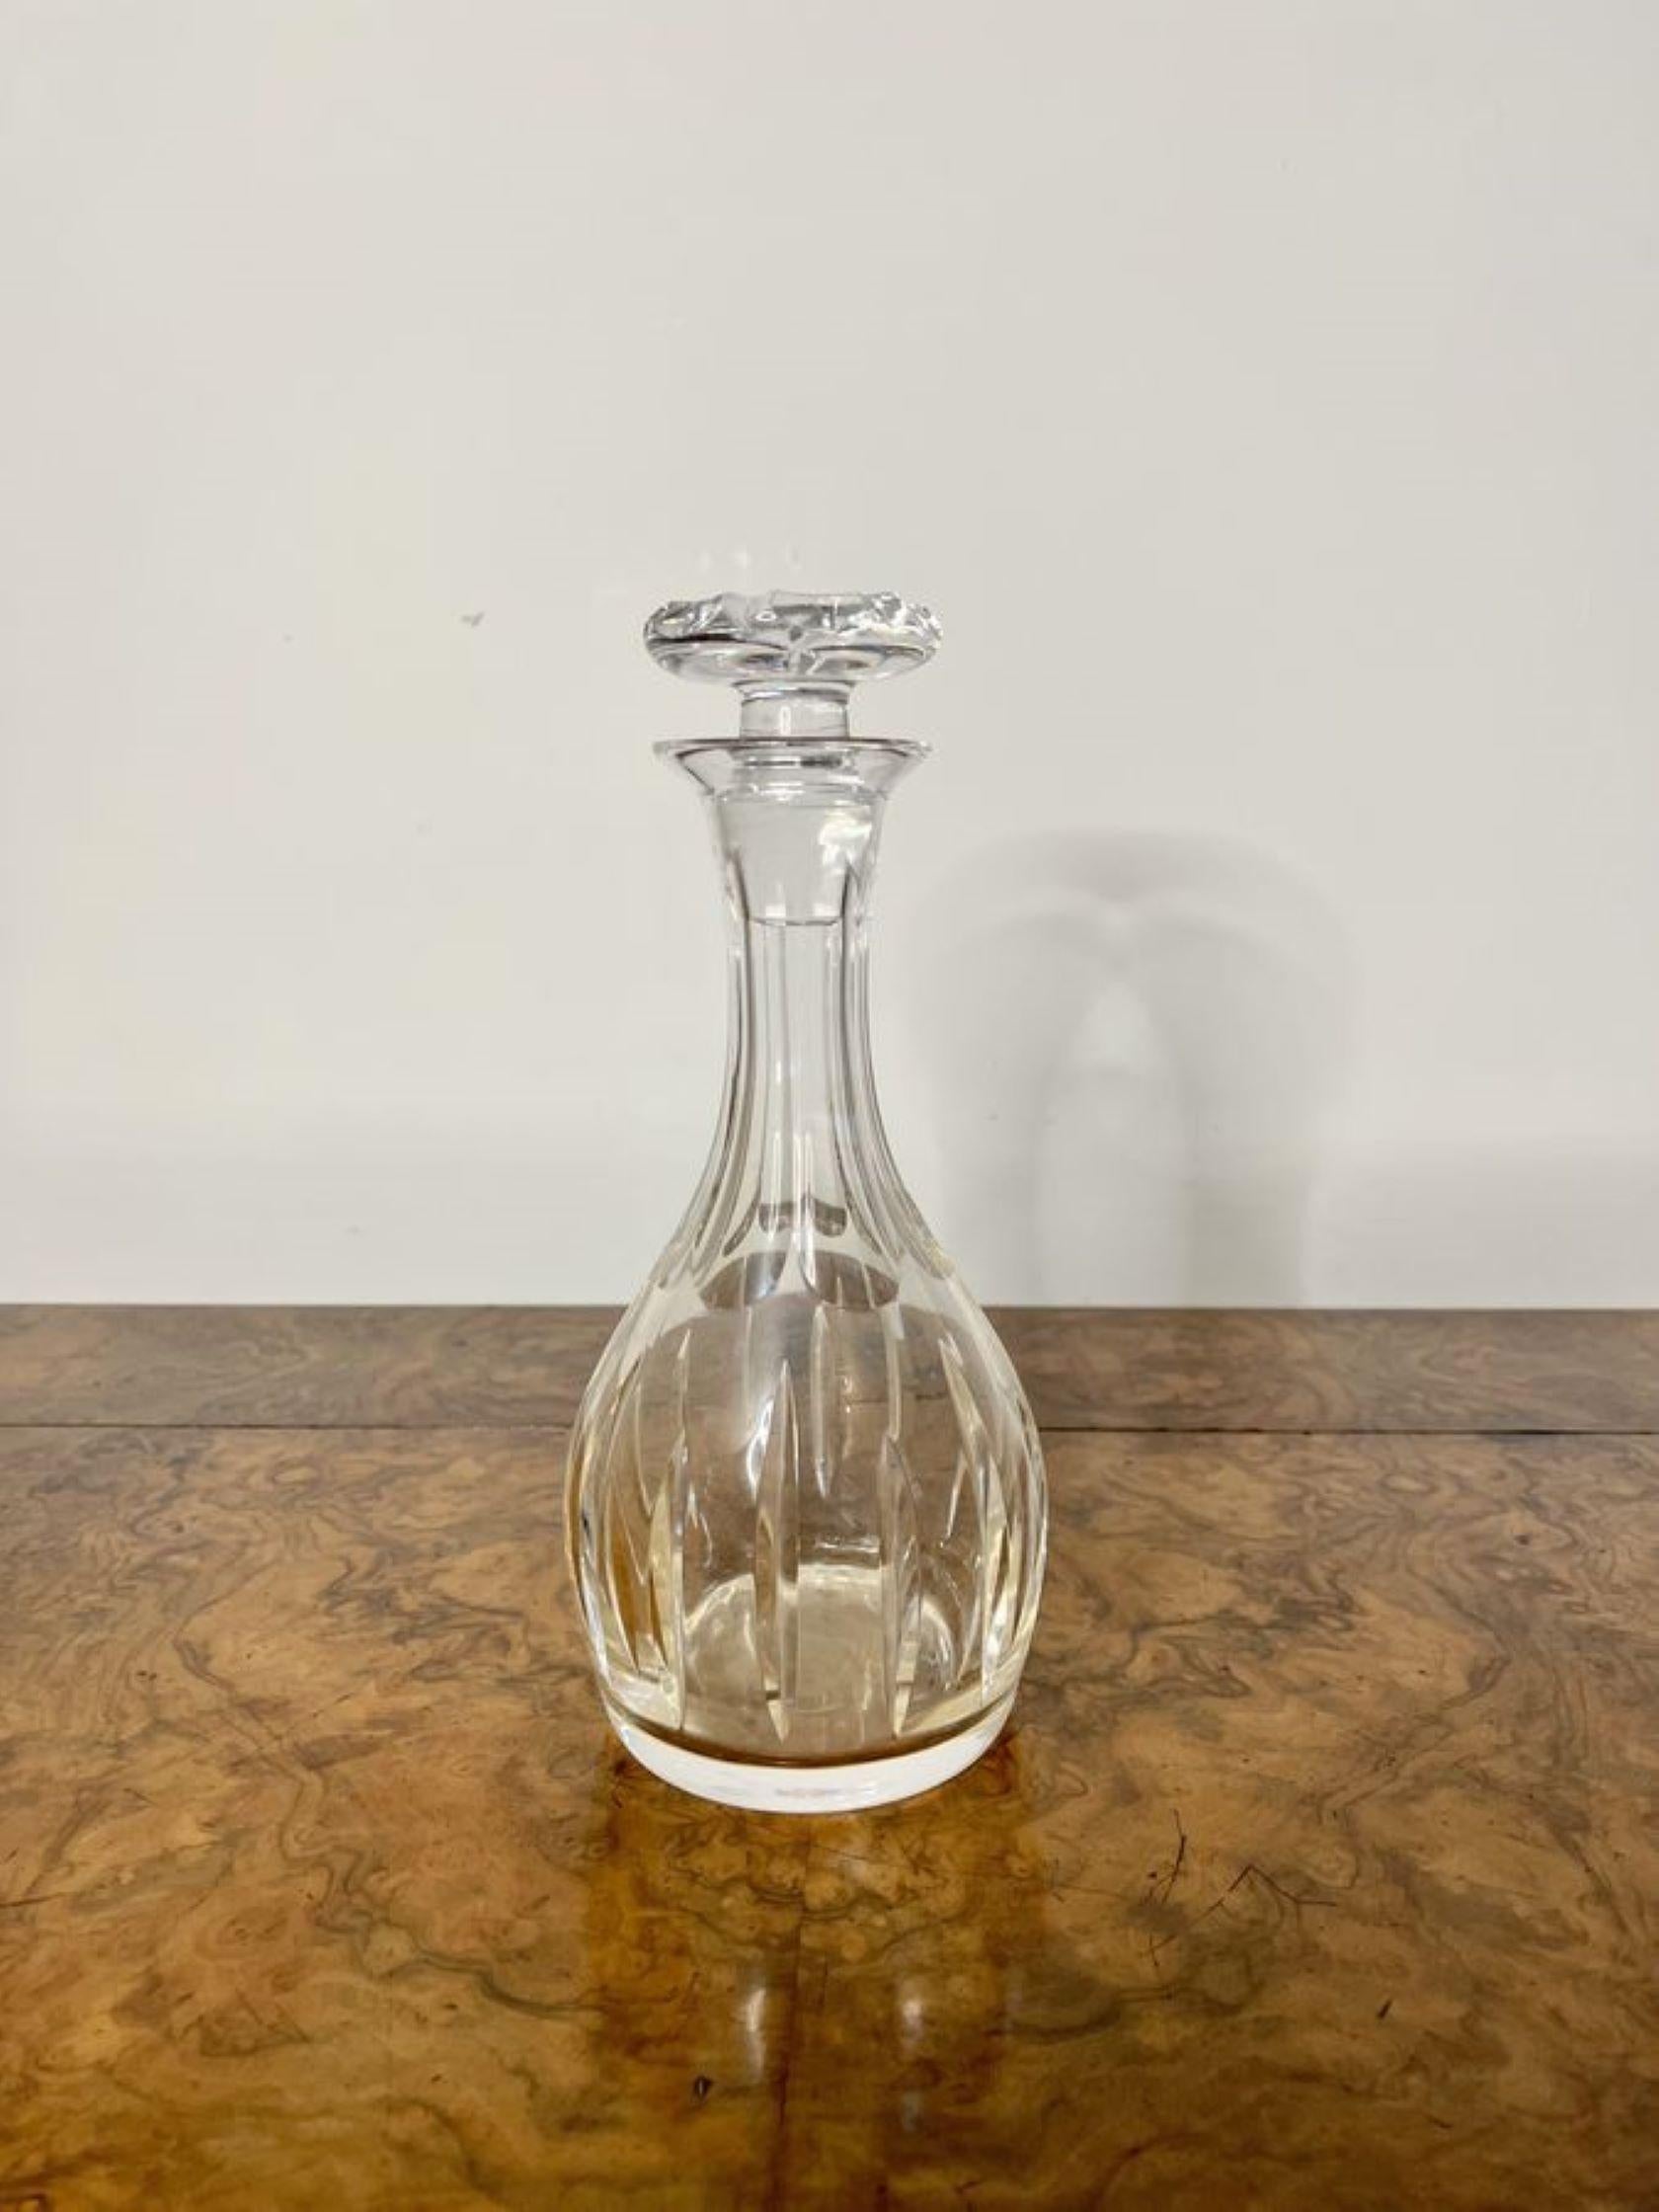 Antique Edwardian decanter having a quality antique Edwardian decanter with the original cut mushroom shaped glass stopper.

D. 1900